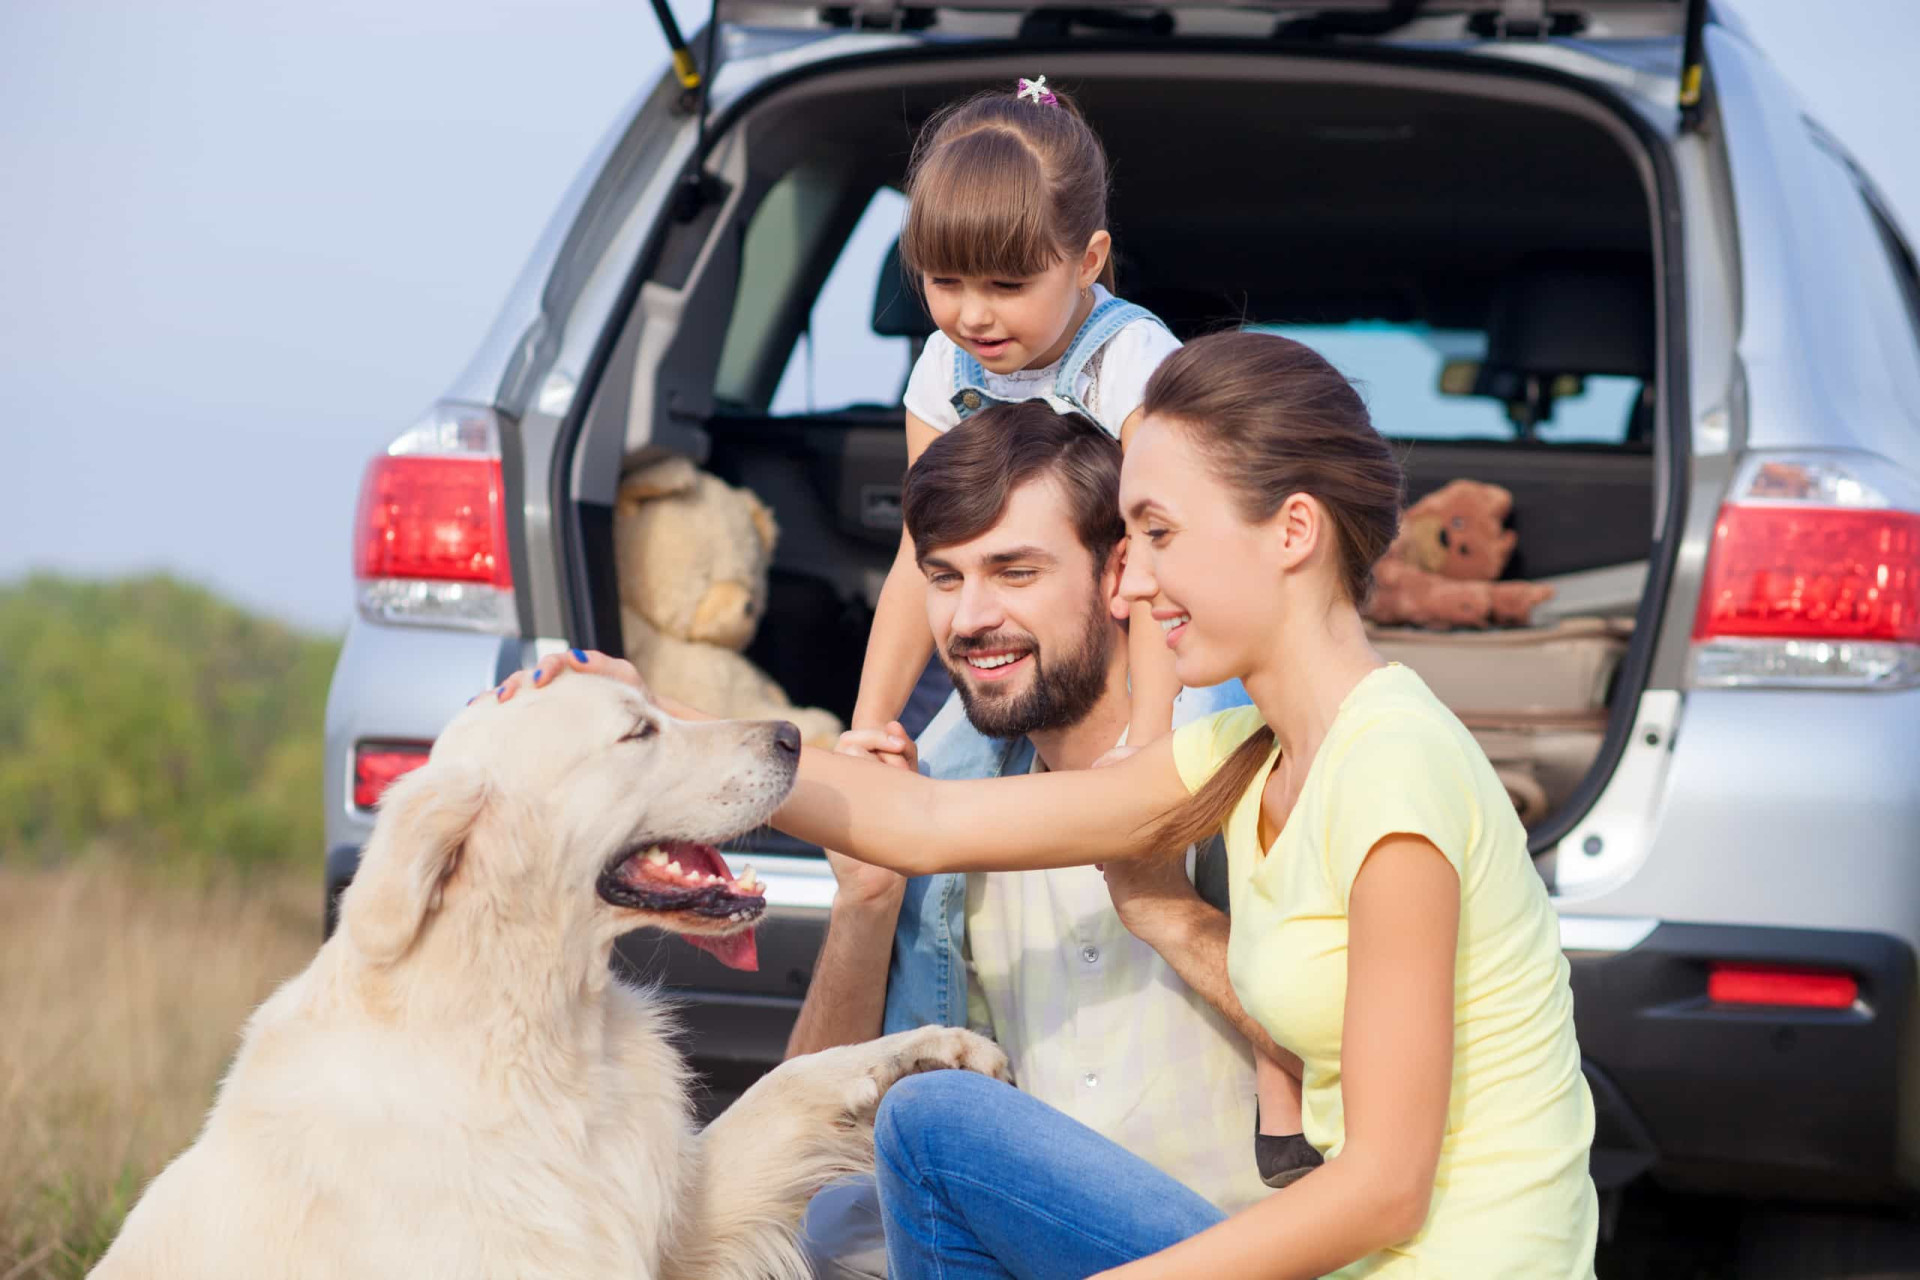 <p>Still want to travel with your dog, but unable to pay for the expensive tickets? You can still travel by car and have a rewarding experience. Click on and find out what steps to take before embarking on your journey by car, as well as essential items to pack and activities to do during the trip. </p><p>You may also like:<a href="https://www.starsinsider.com/n/252119?utm_source=msn.com&utm_medium=display&utm_campaign=referral_description&utm_content=719768en-us"> Famous celebrities you didn't know were related</a></p>